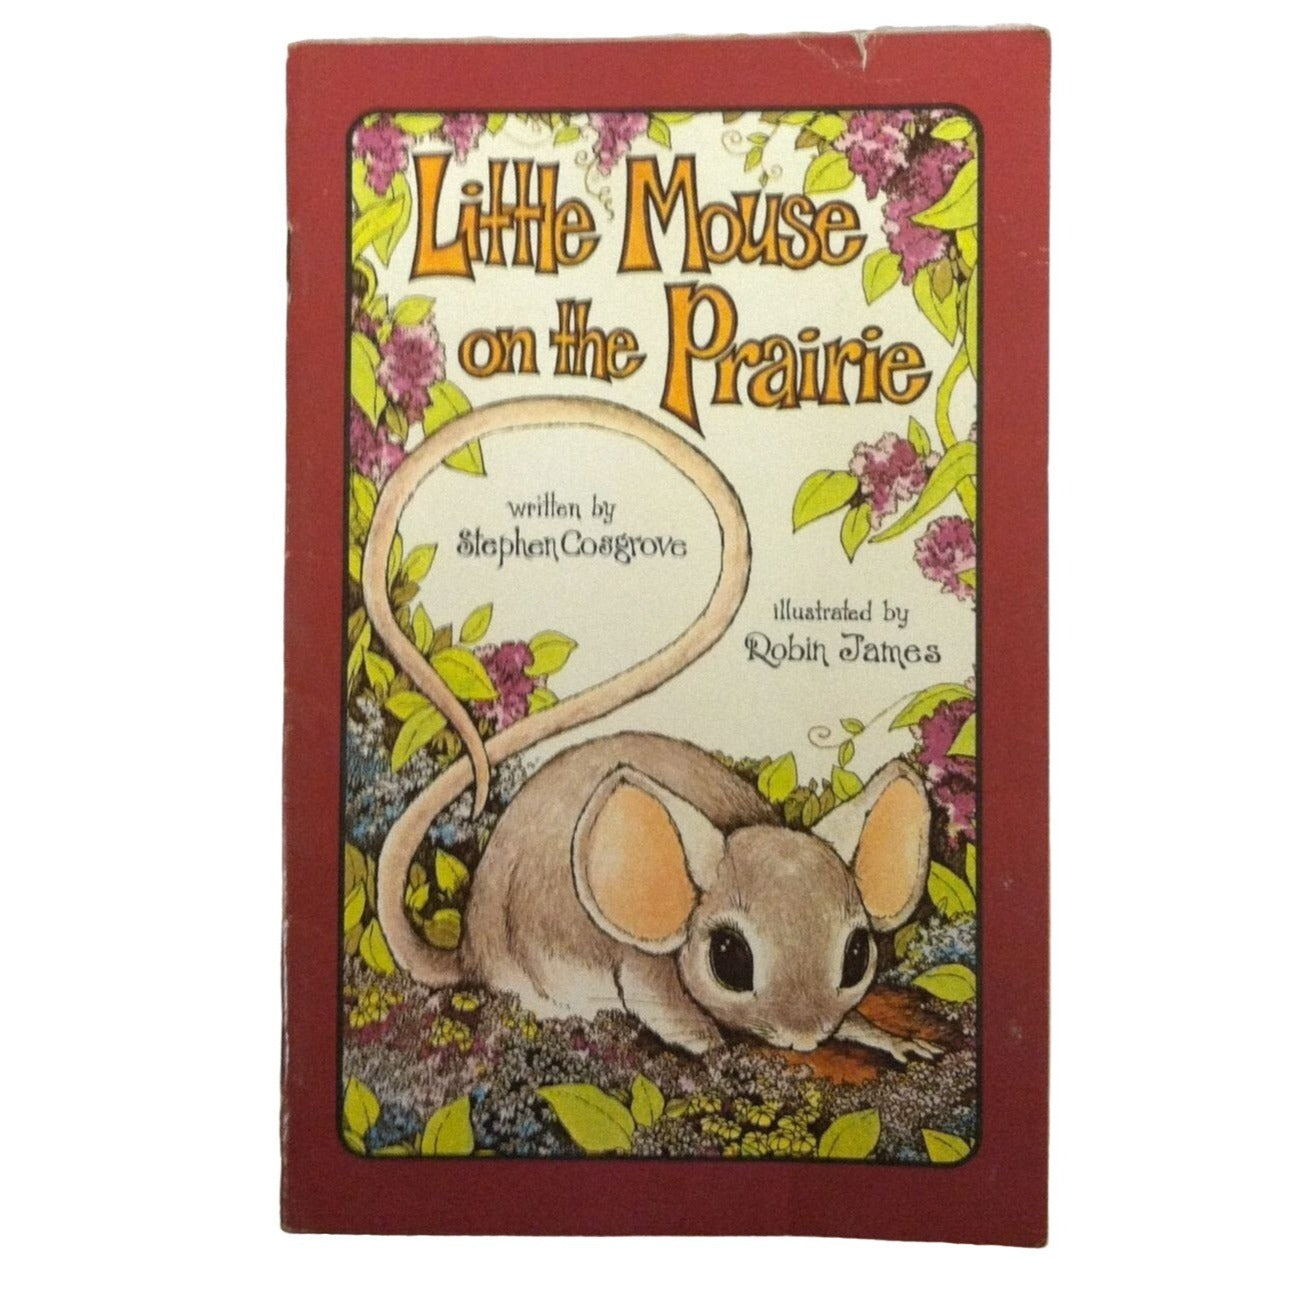 Little Mouse on the Prairie Paperback book by Stephen Cosgrove